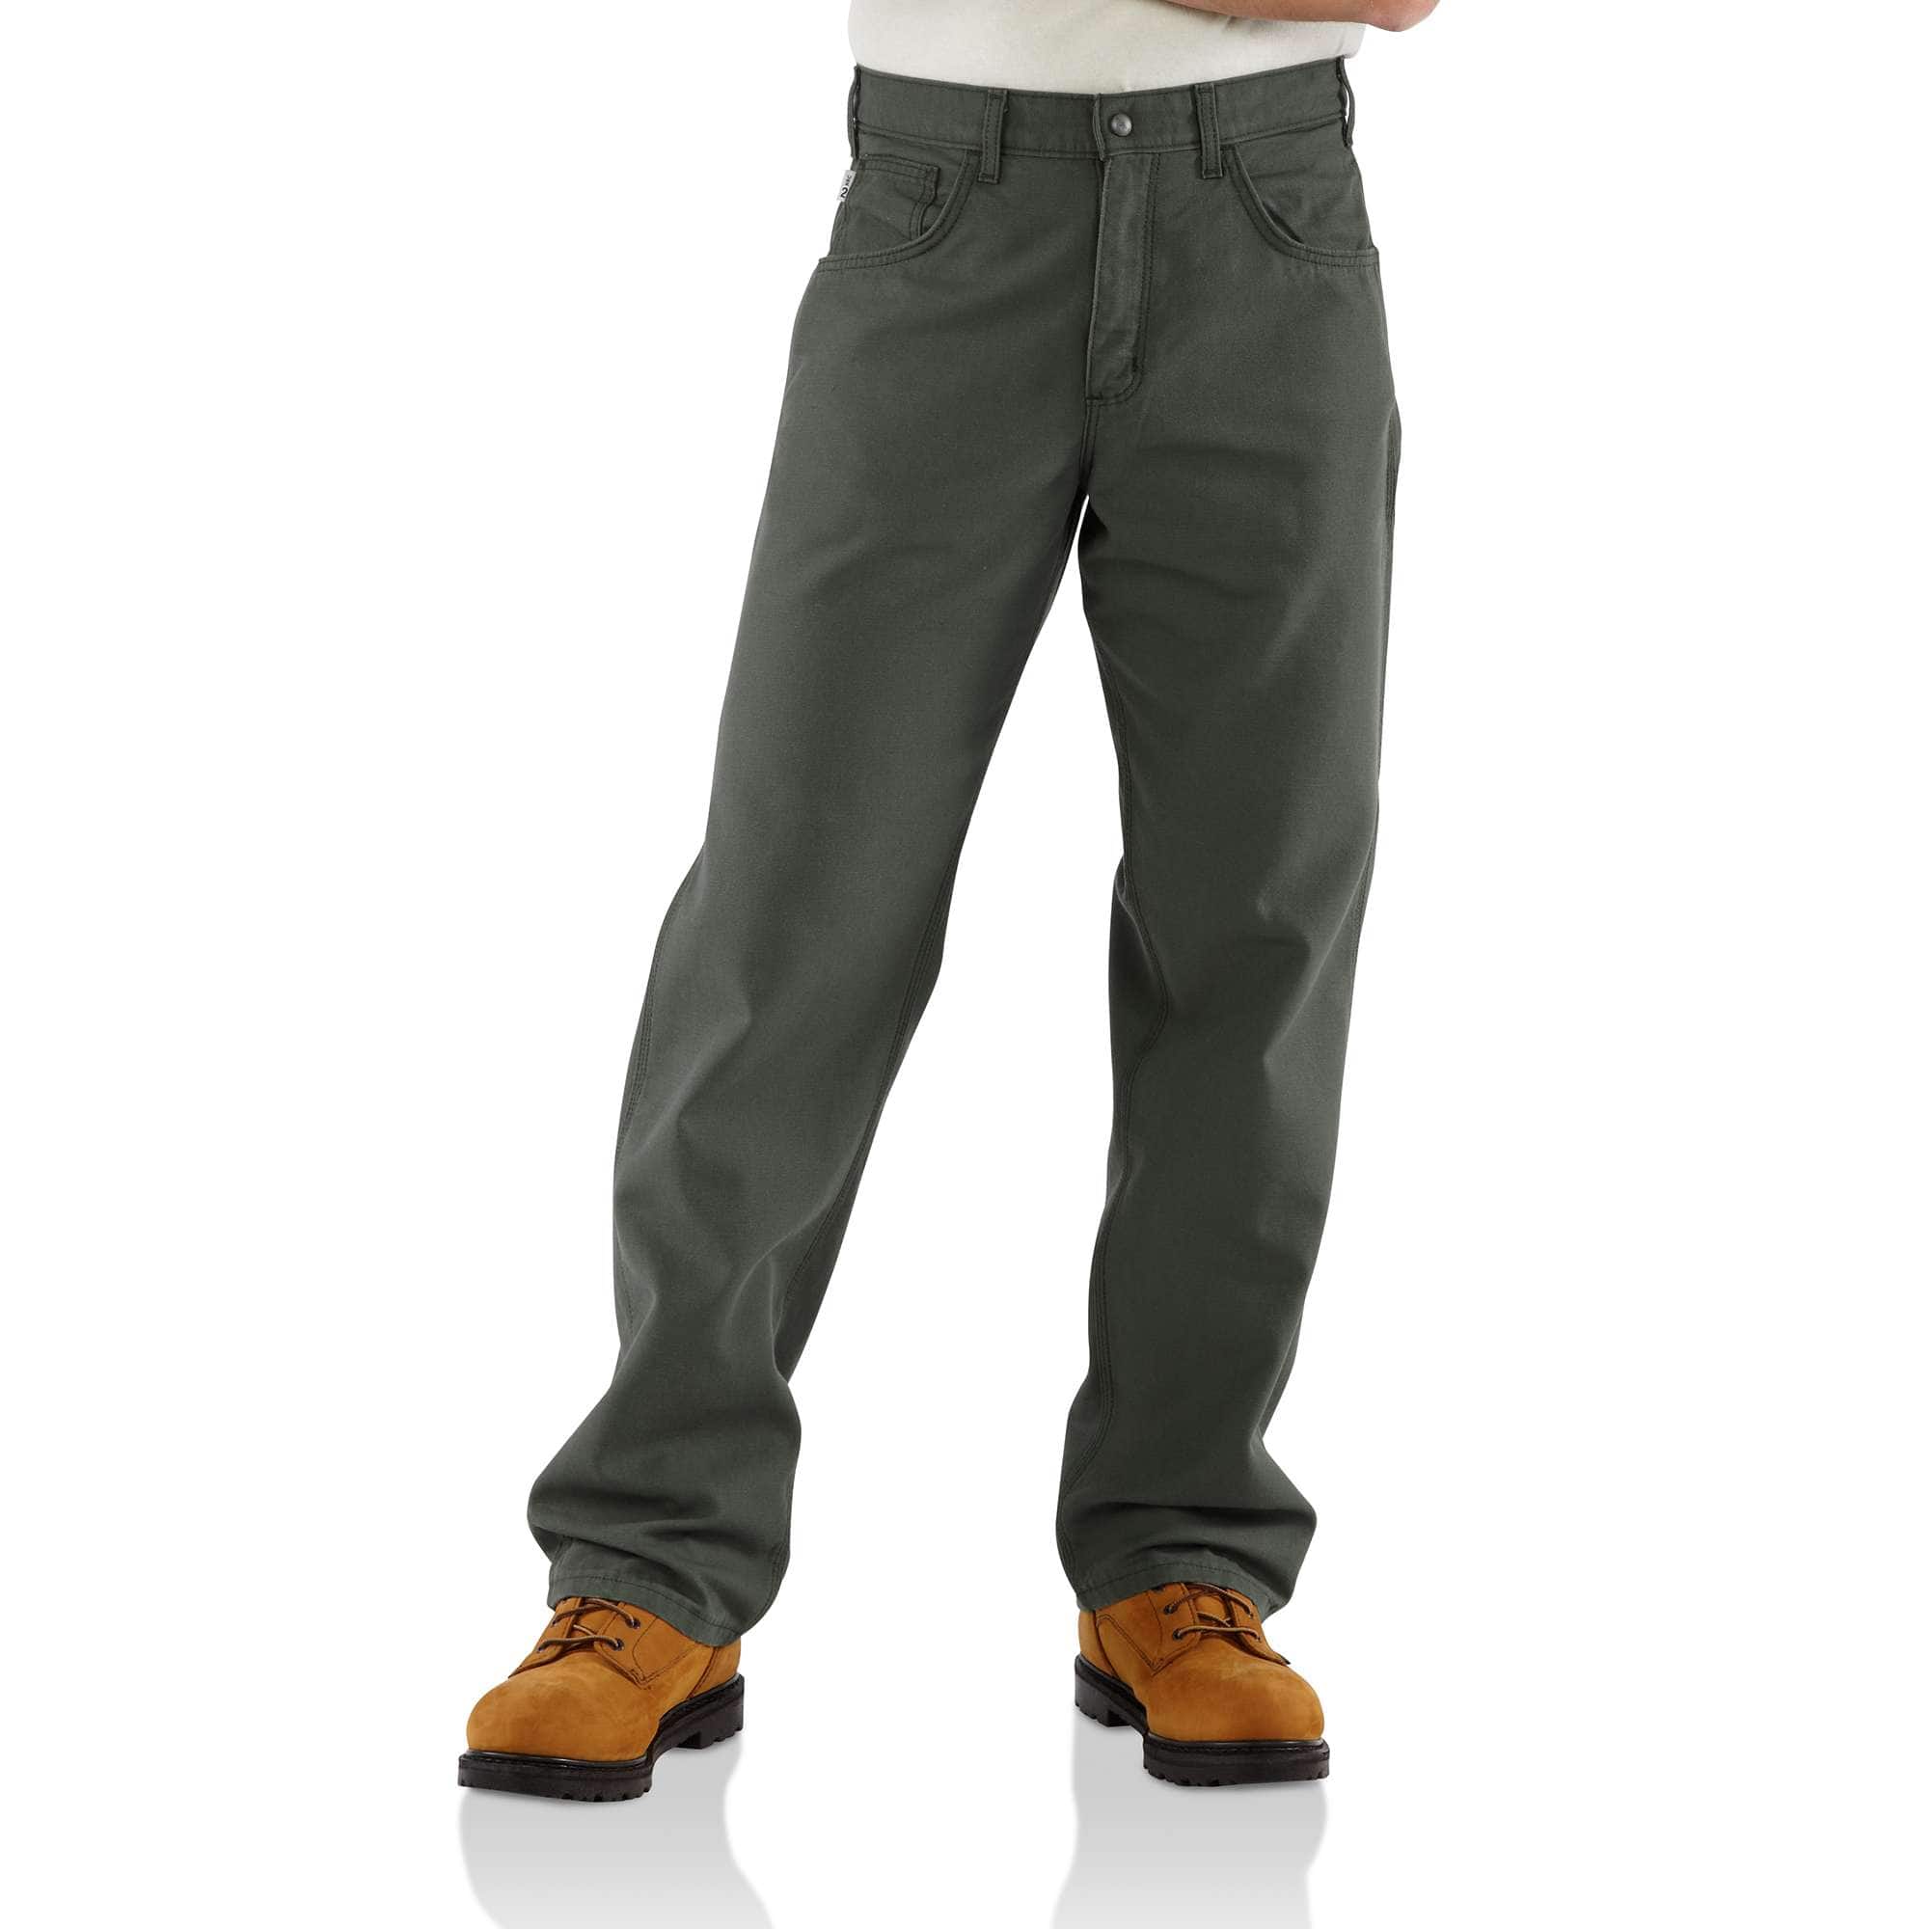 Carhartt Men's FR Work Pants - Country Outfitter